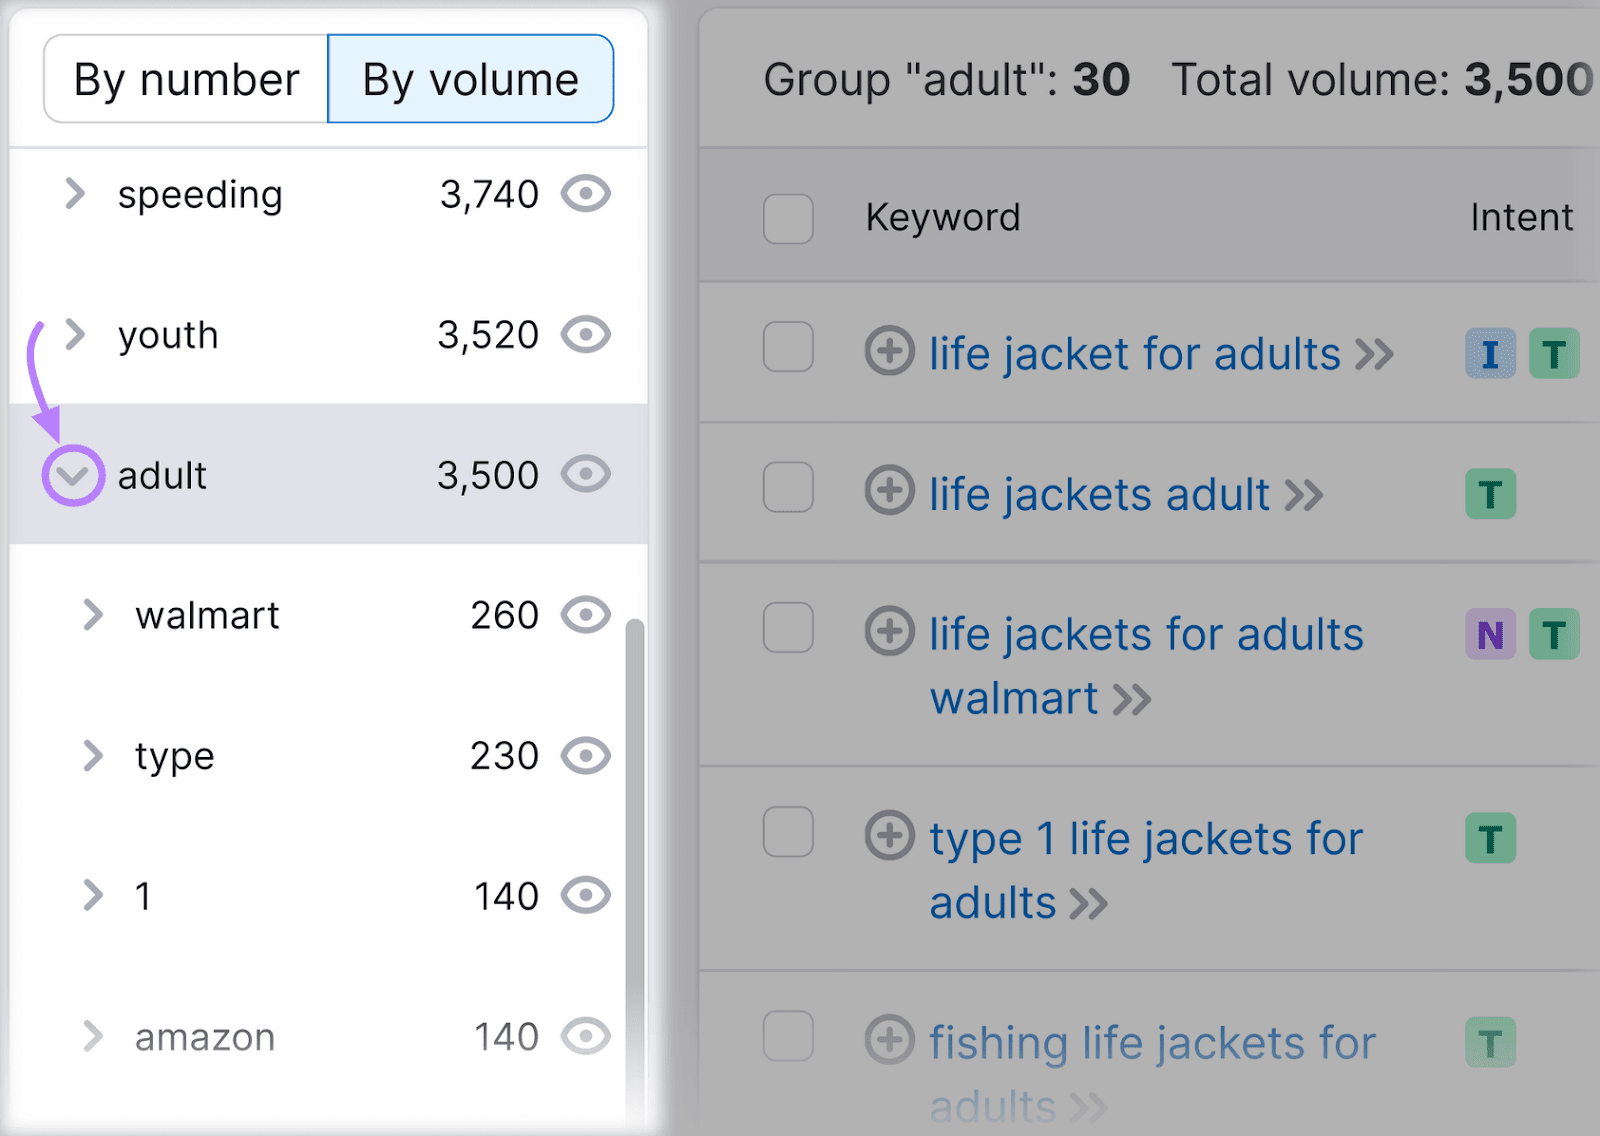 Keyword Magic Tool showing on the right the selected keyword group "adult" with the list of associated subgroups.